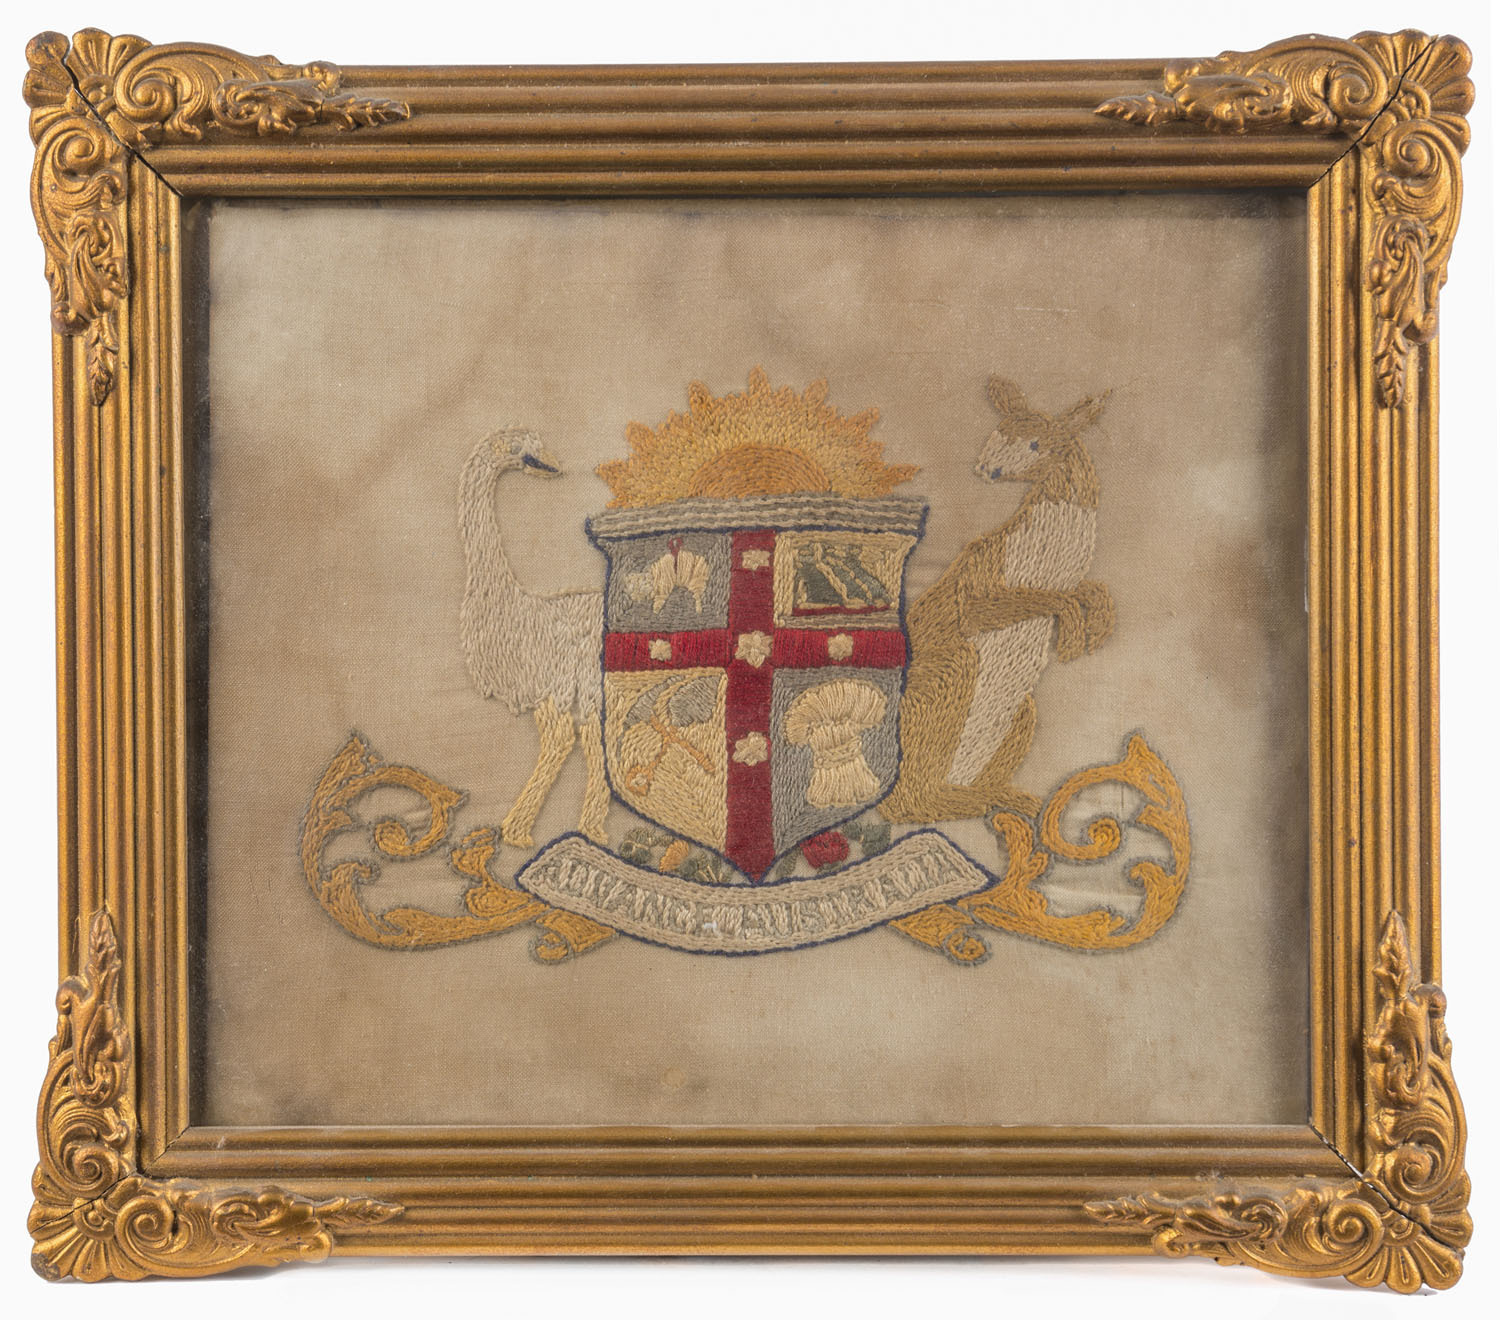 Coat Of Arms Wall Plaque 37 cm